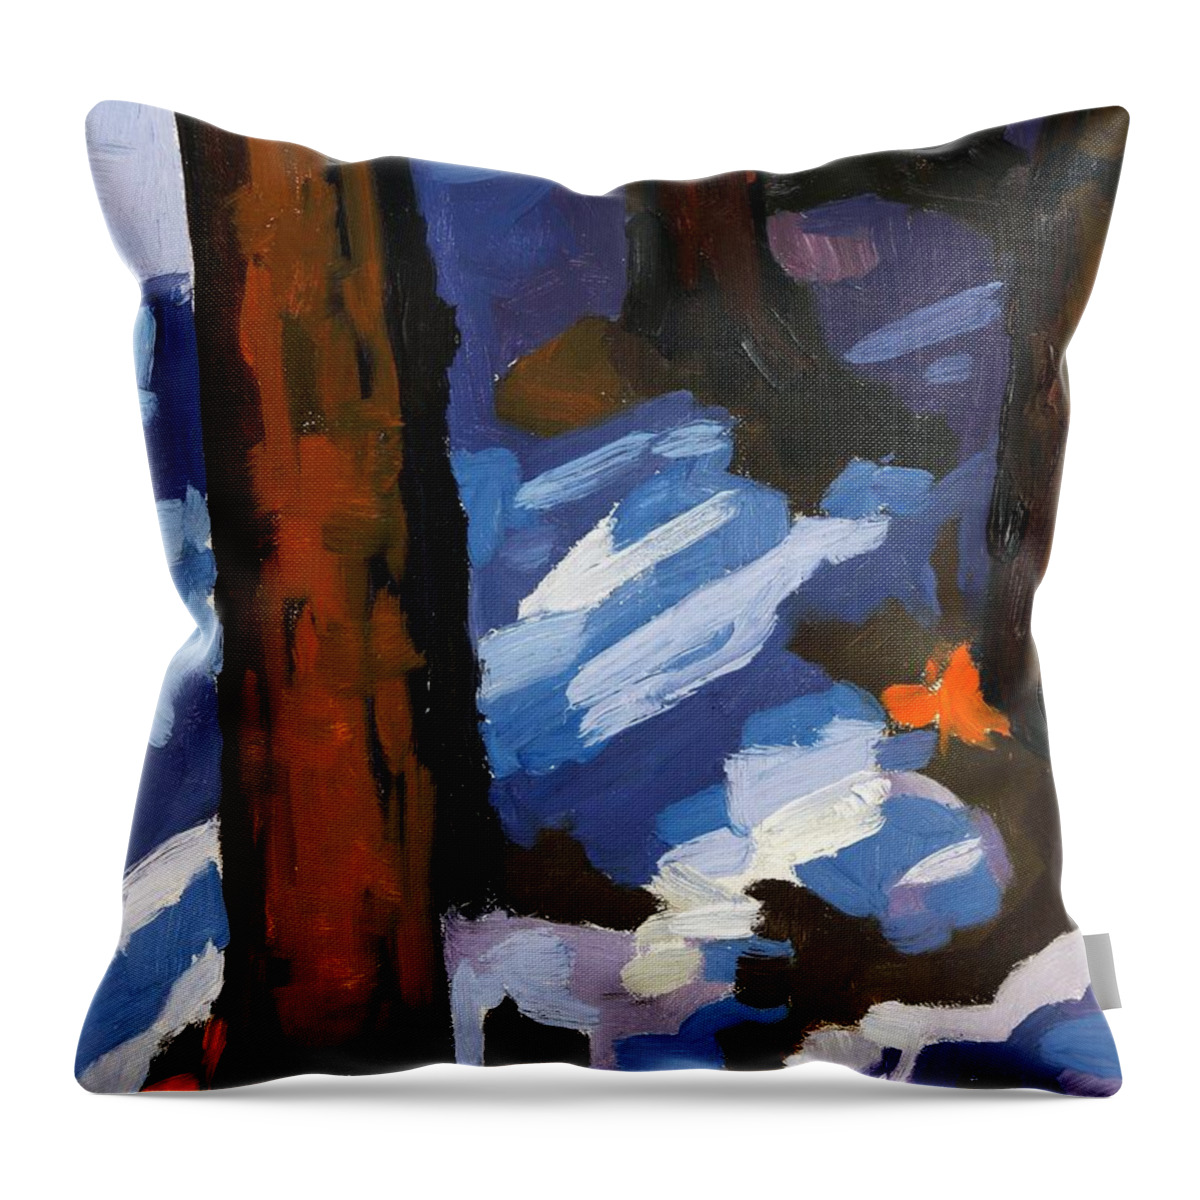 1098 Throw Pillow featuring the painting Trunks by Phil Chadwick